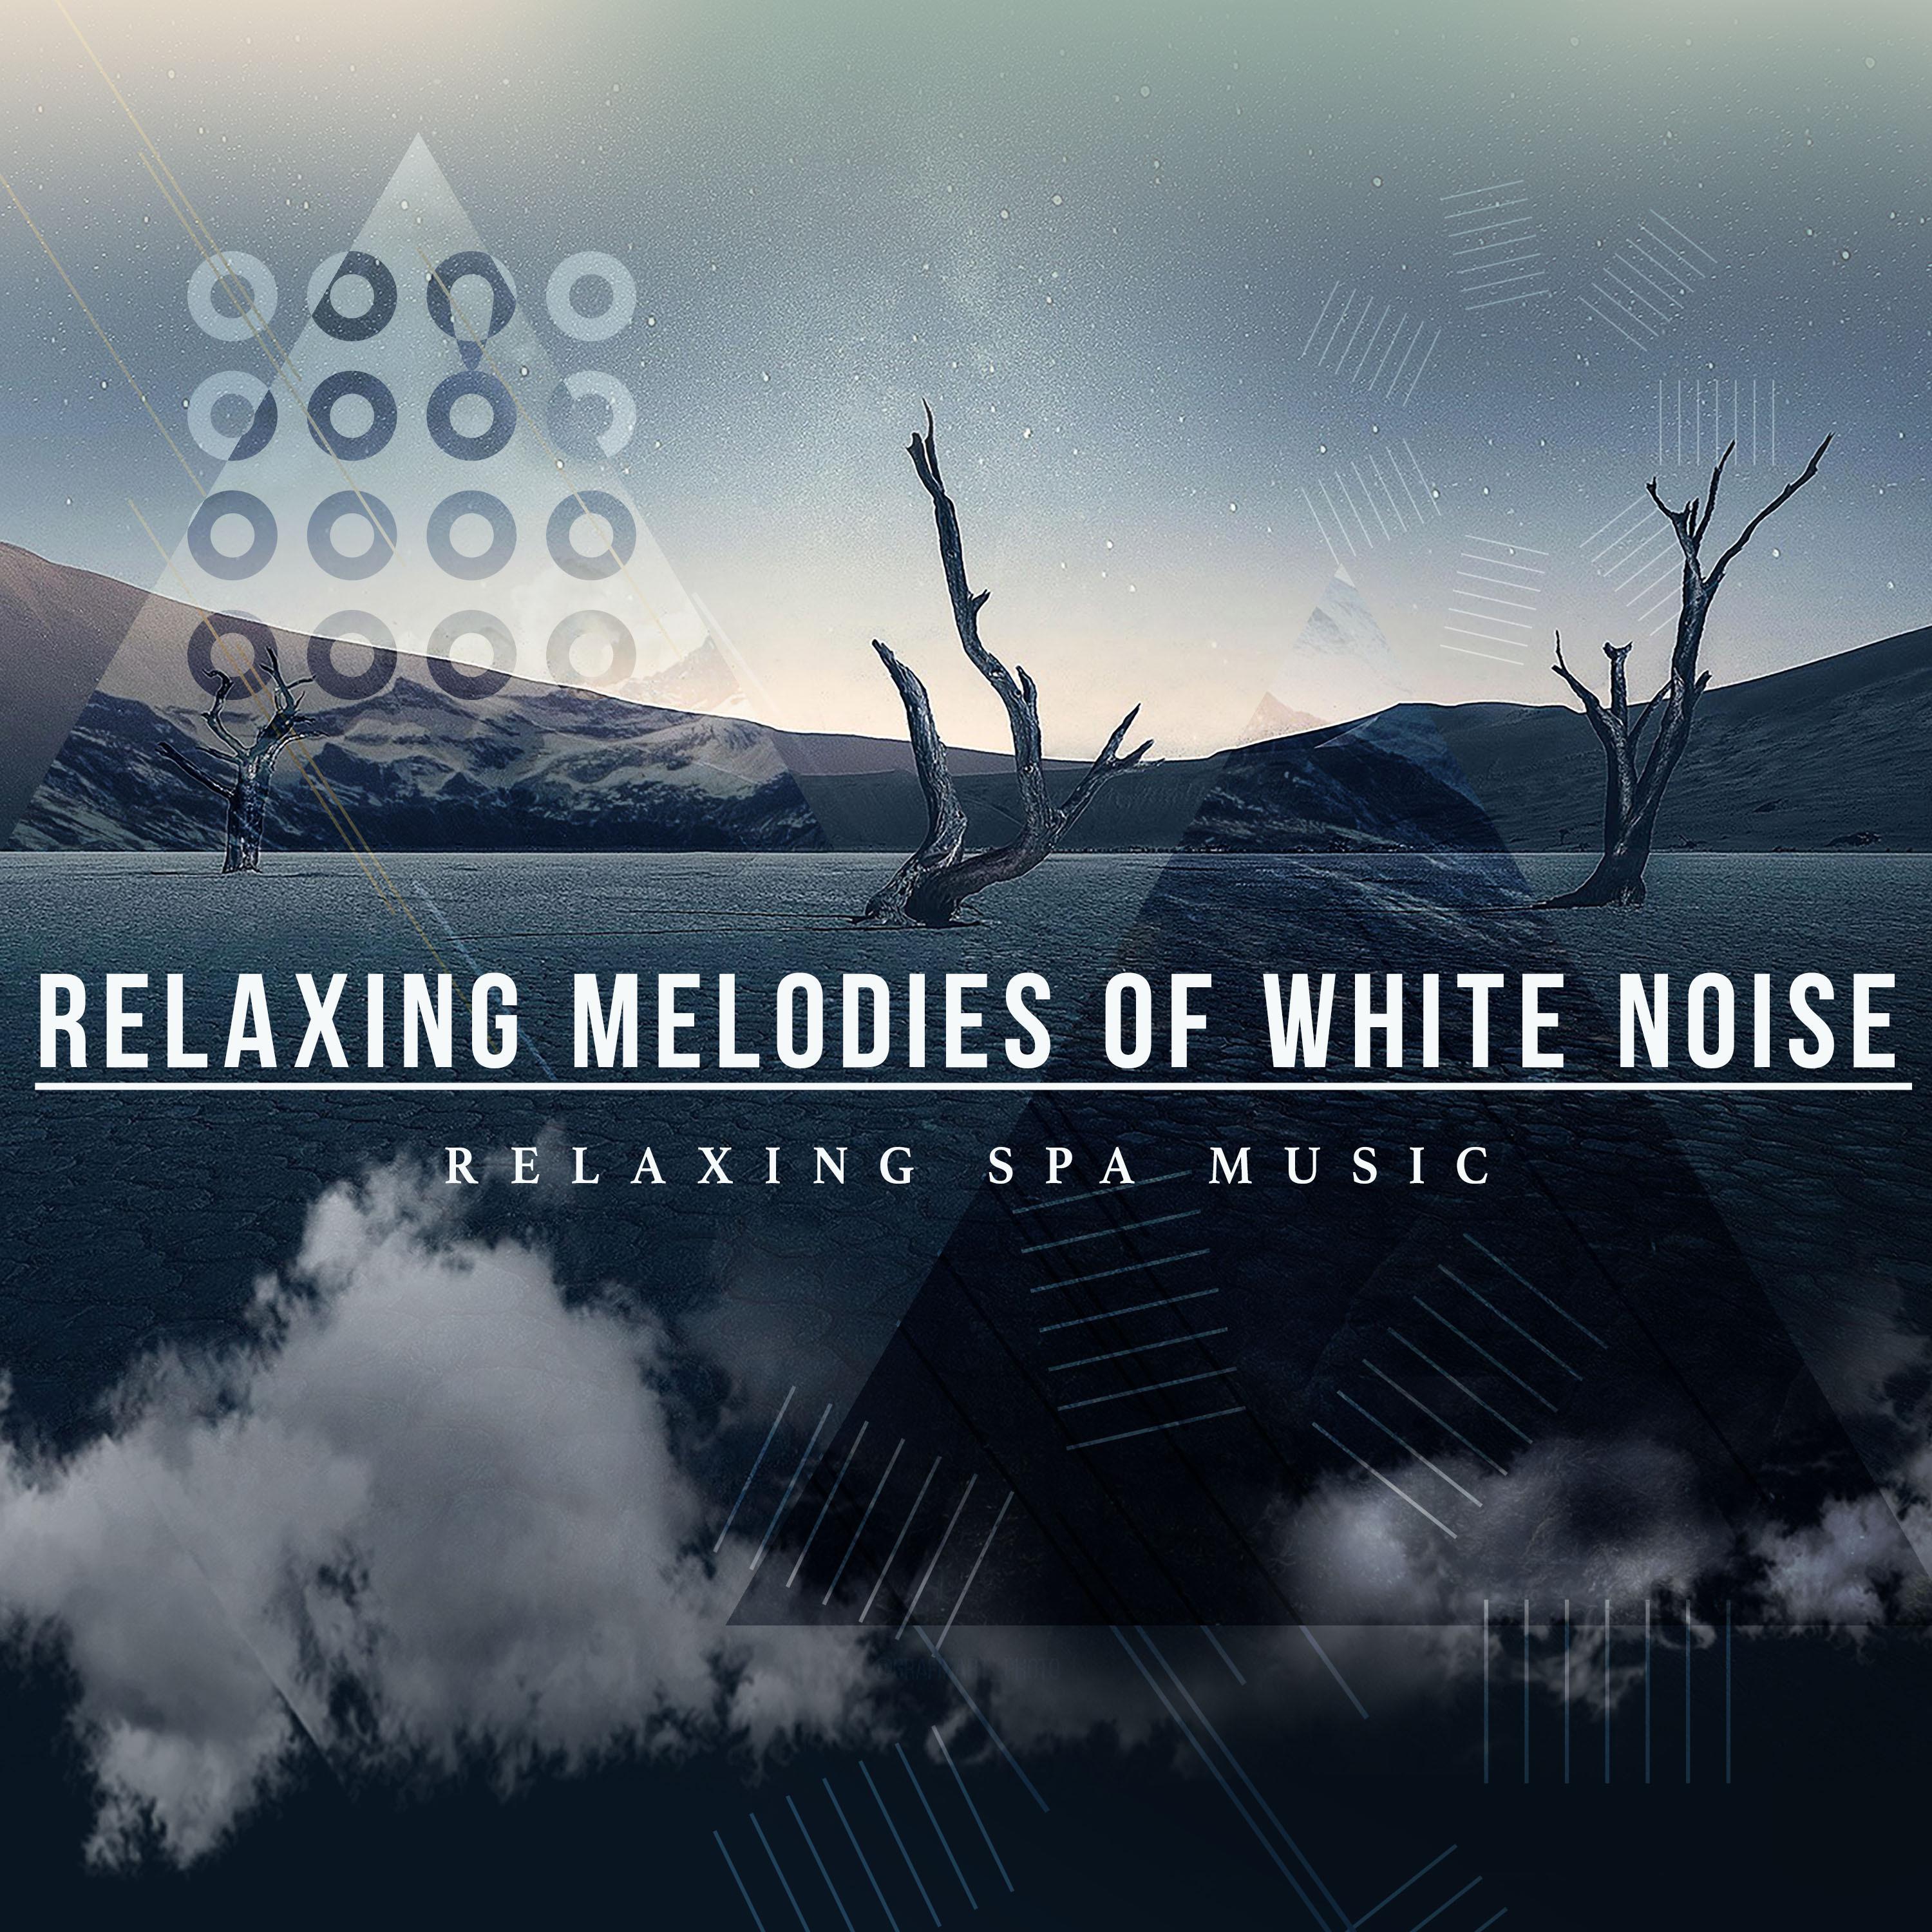 Relaxing Melodies of White Noise